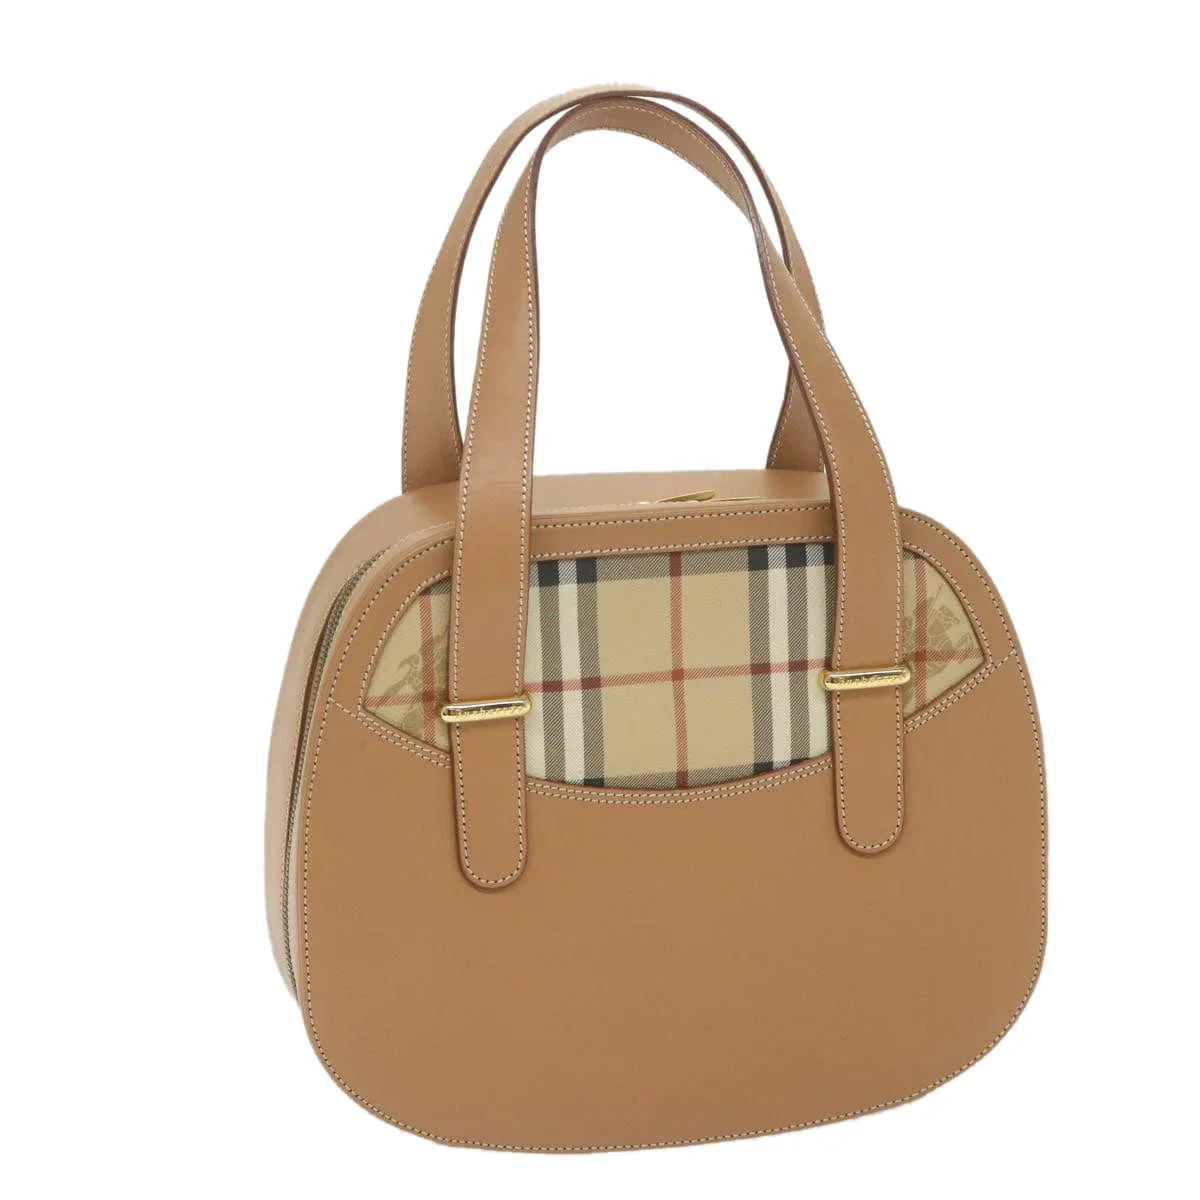 Image of Burberrys Hand Bag Leather Beige Auth 59466 AJCSC1003